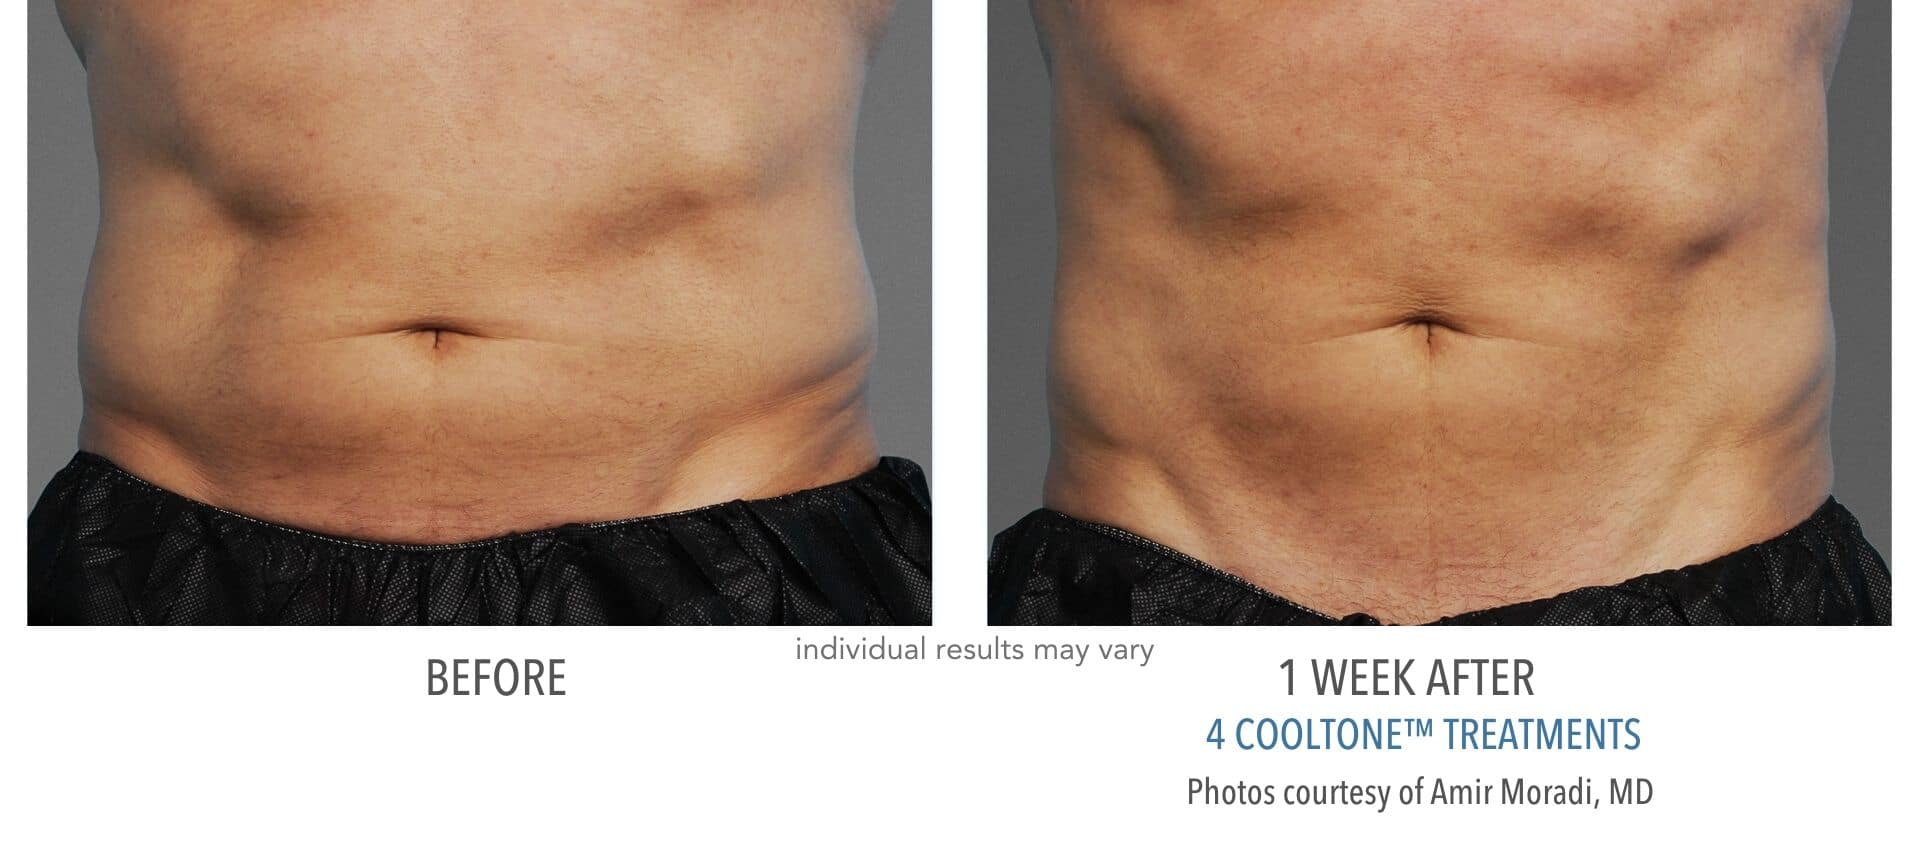 cooltone before and after results to man's abdomen.